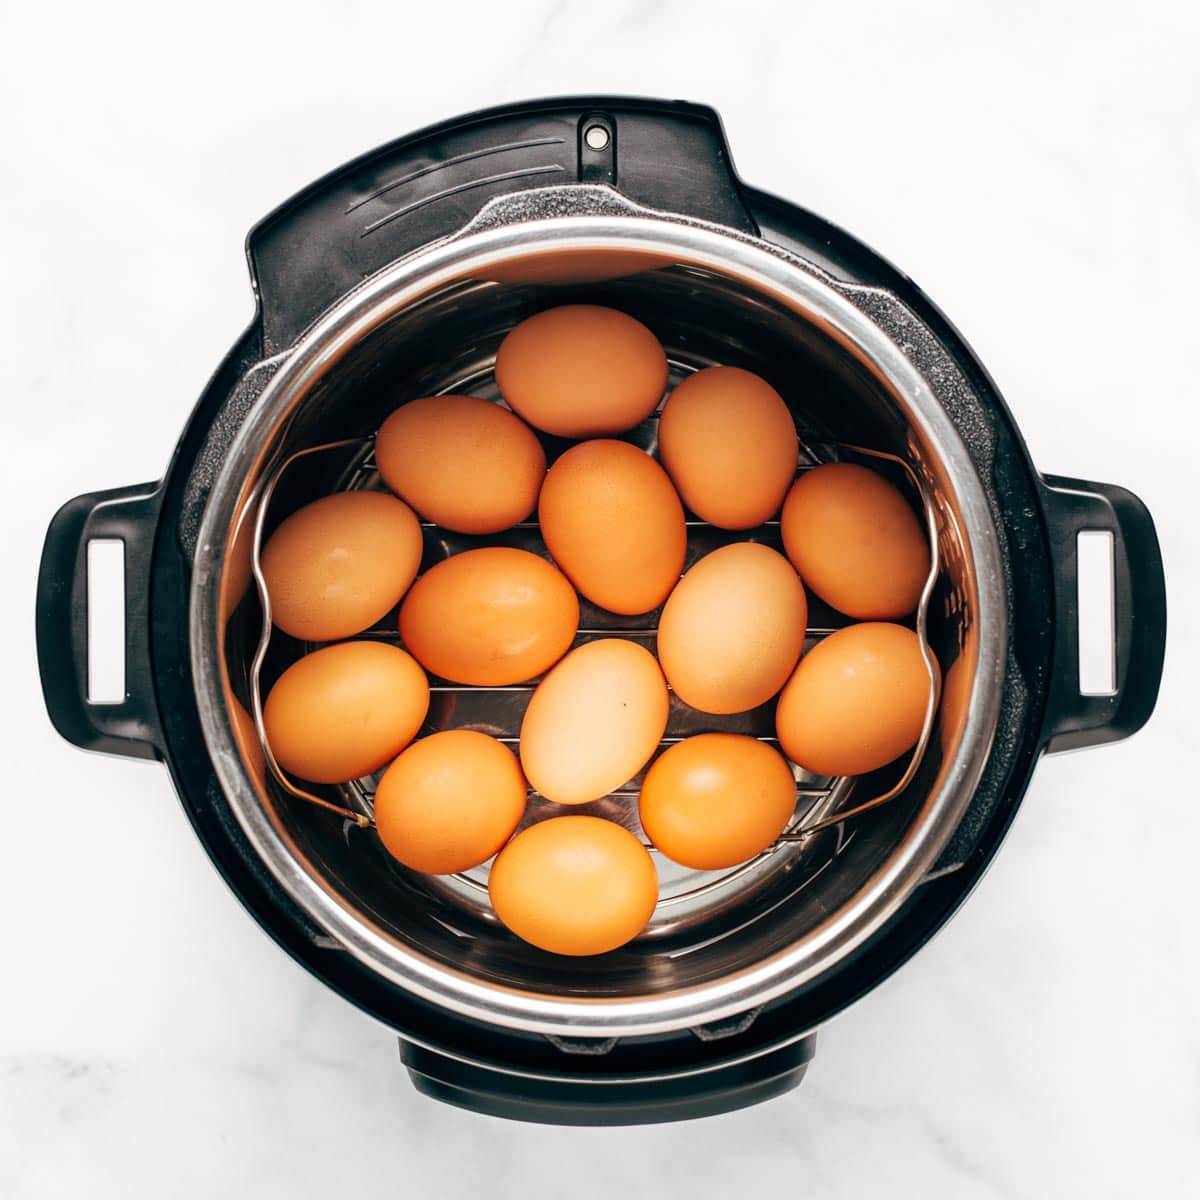 Eggs in the Instant Pot.